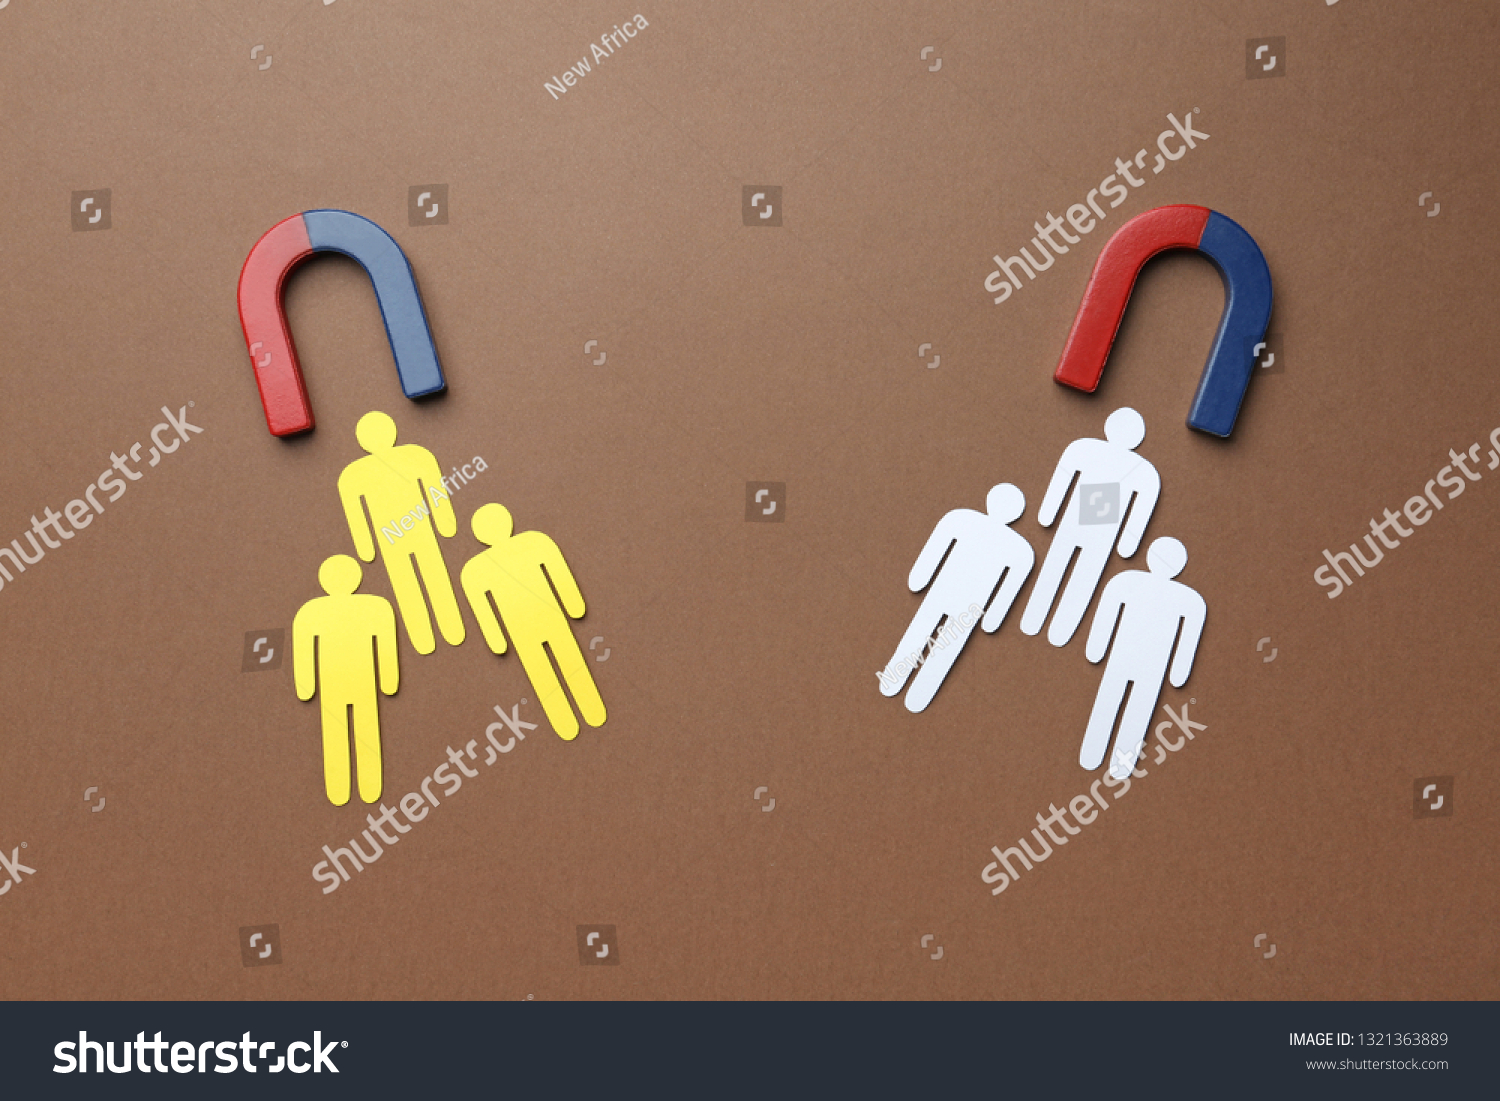 Magnets attracting paper people on color background, flat lay. Marketing concept #1321363889